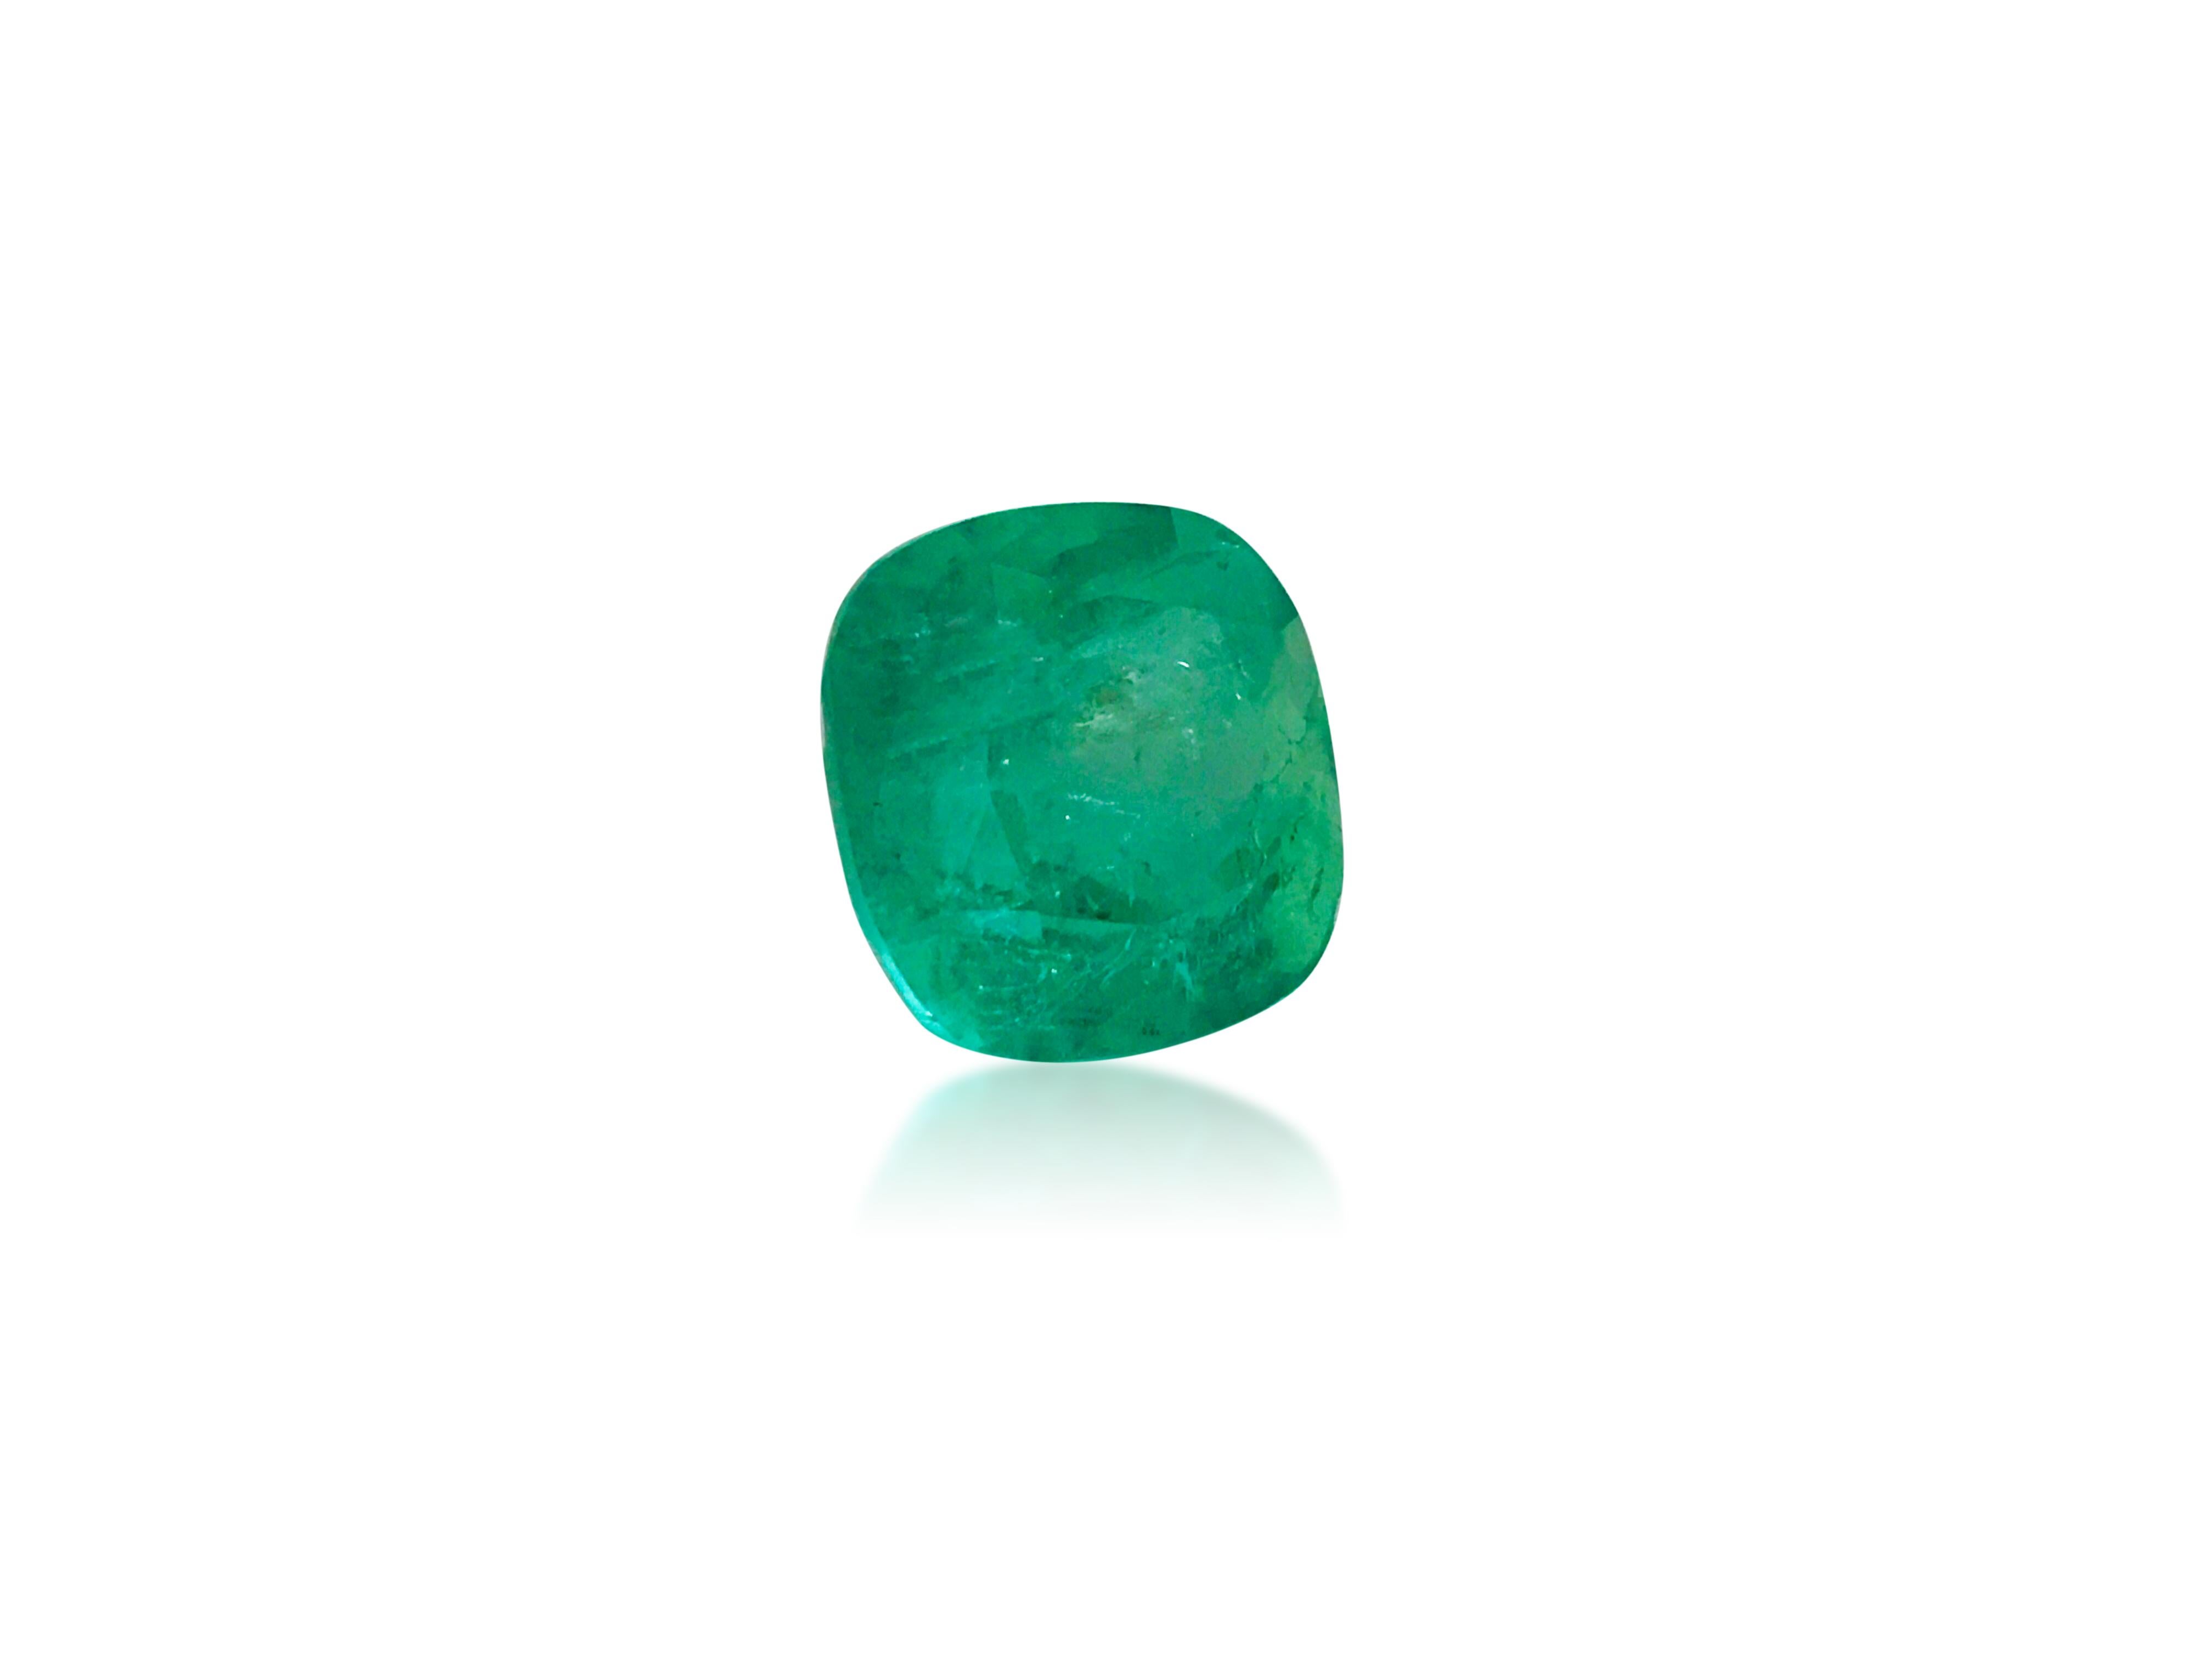 19.60 carat loose emerald. 
Superb cushion cut loose emerald. 
6.20 x 5.80 mm. Deep color and shine. Strong green color. 100% natural earth mined emerald. Vivid color and saturation. Perfect loose gemstone to set in rings, pendants and other pieces